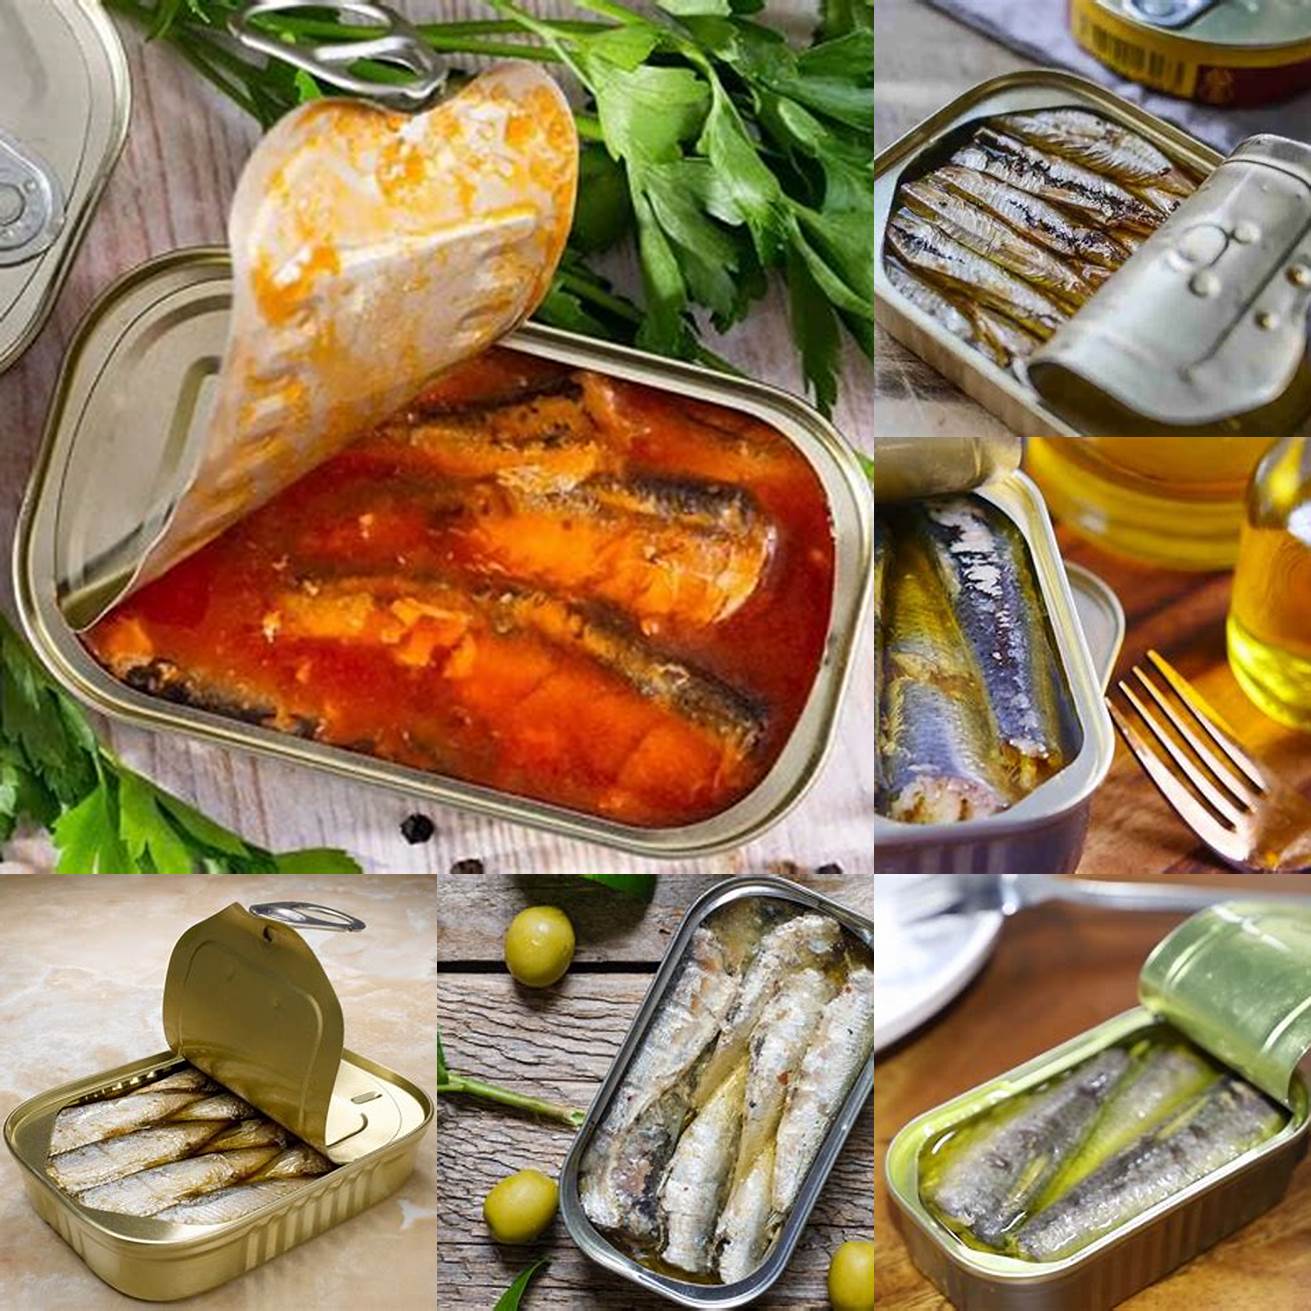 Canned sardines can help improve your cats joint health